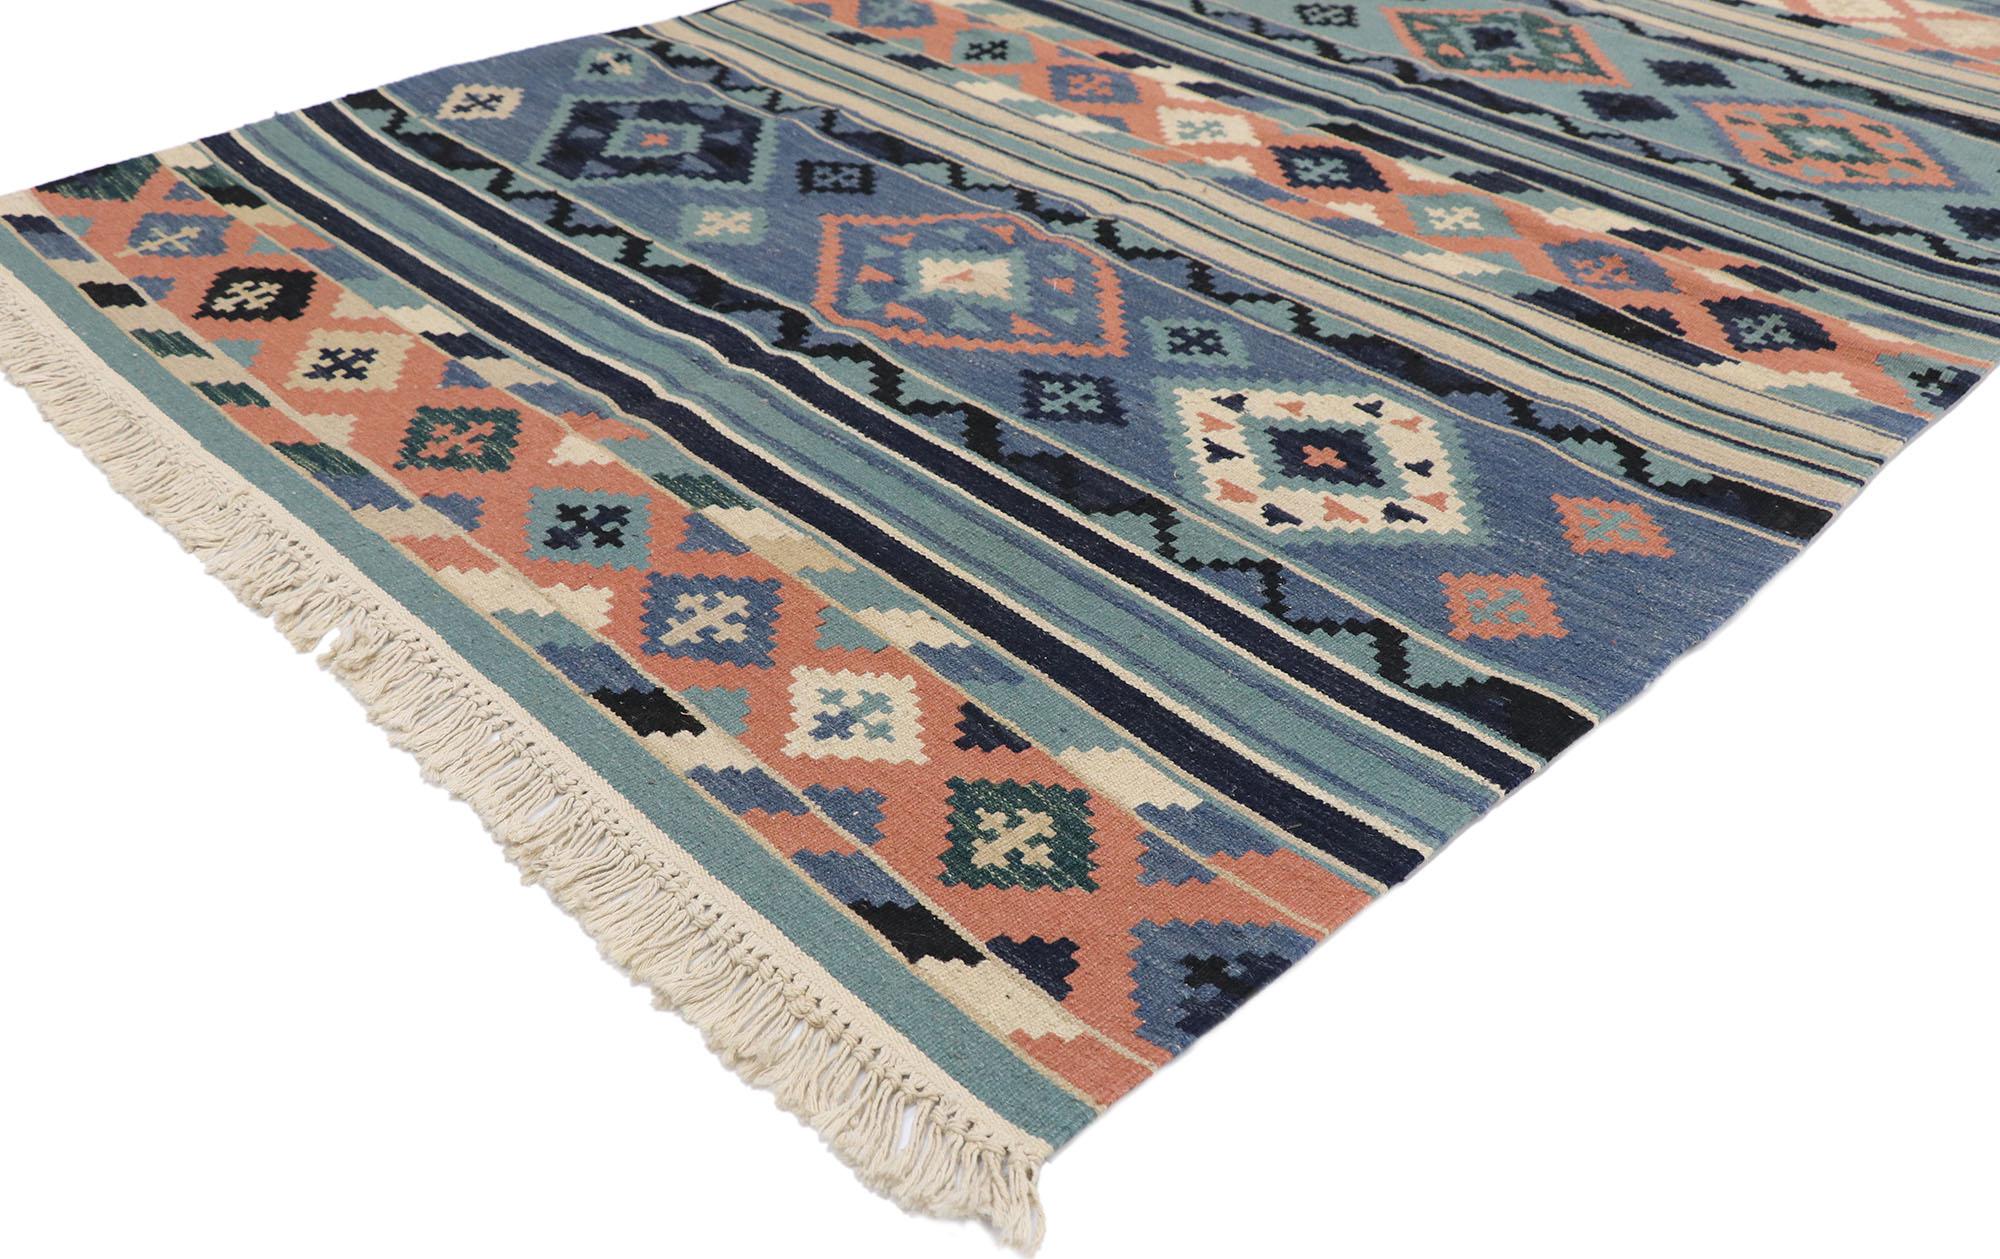 77816 vintage Persian Shiraz Kilim rug with Bohemian Tribal style 04'01 x 06'01. Full of tiny details and a bold expressive design combined with tribal style, this hand-woven wool vintage Persian Shiraz kilim rug is a captivating vision of woven